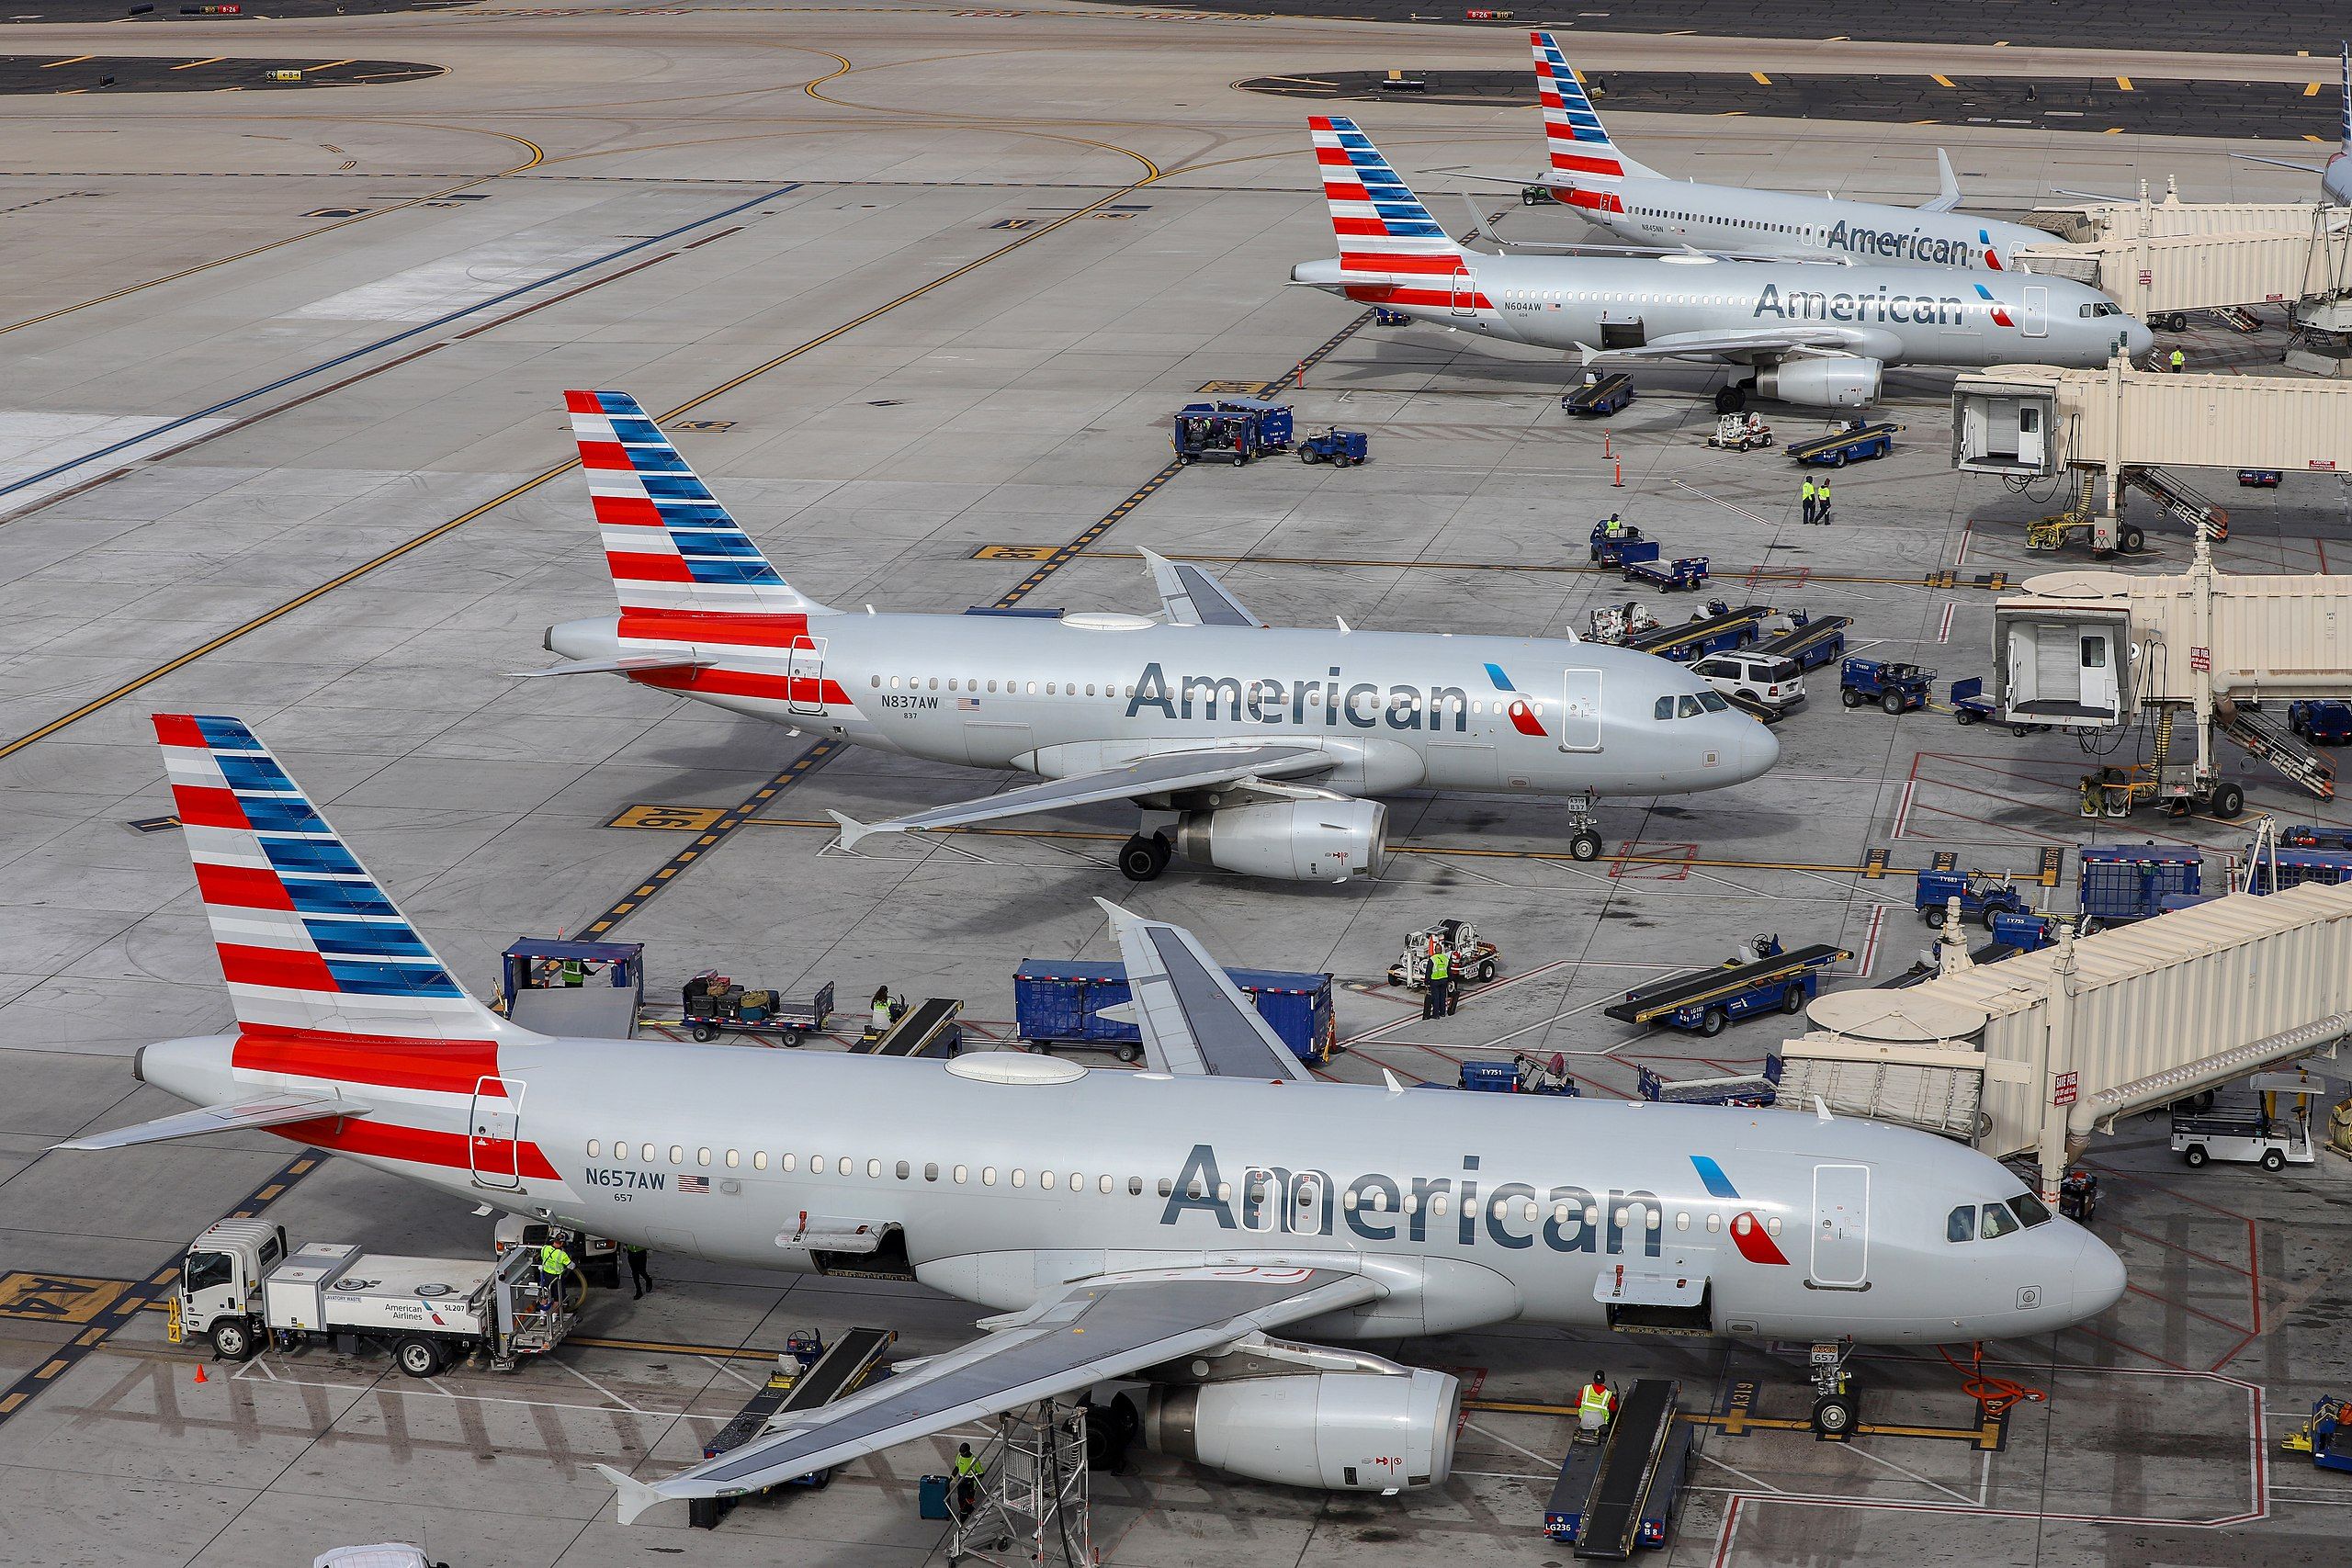 American Airlines at Phoenix